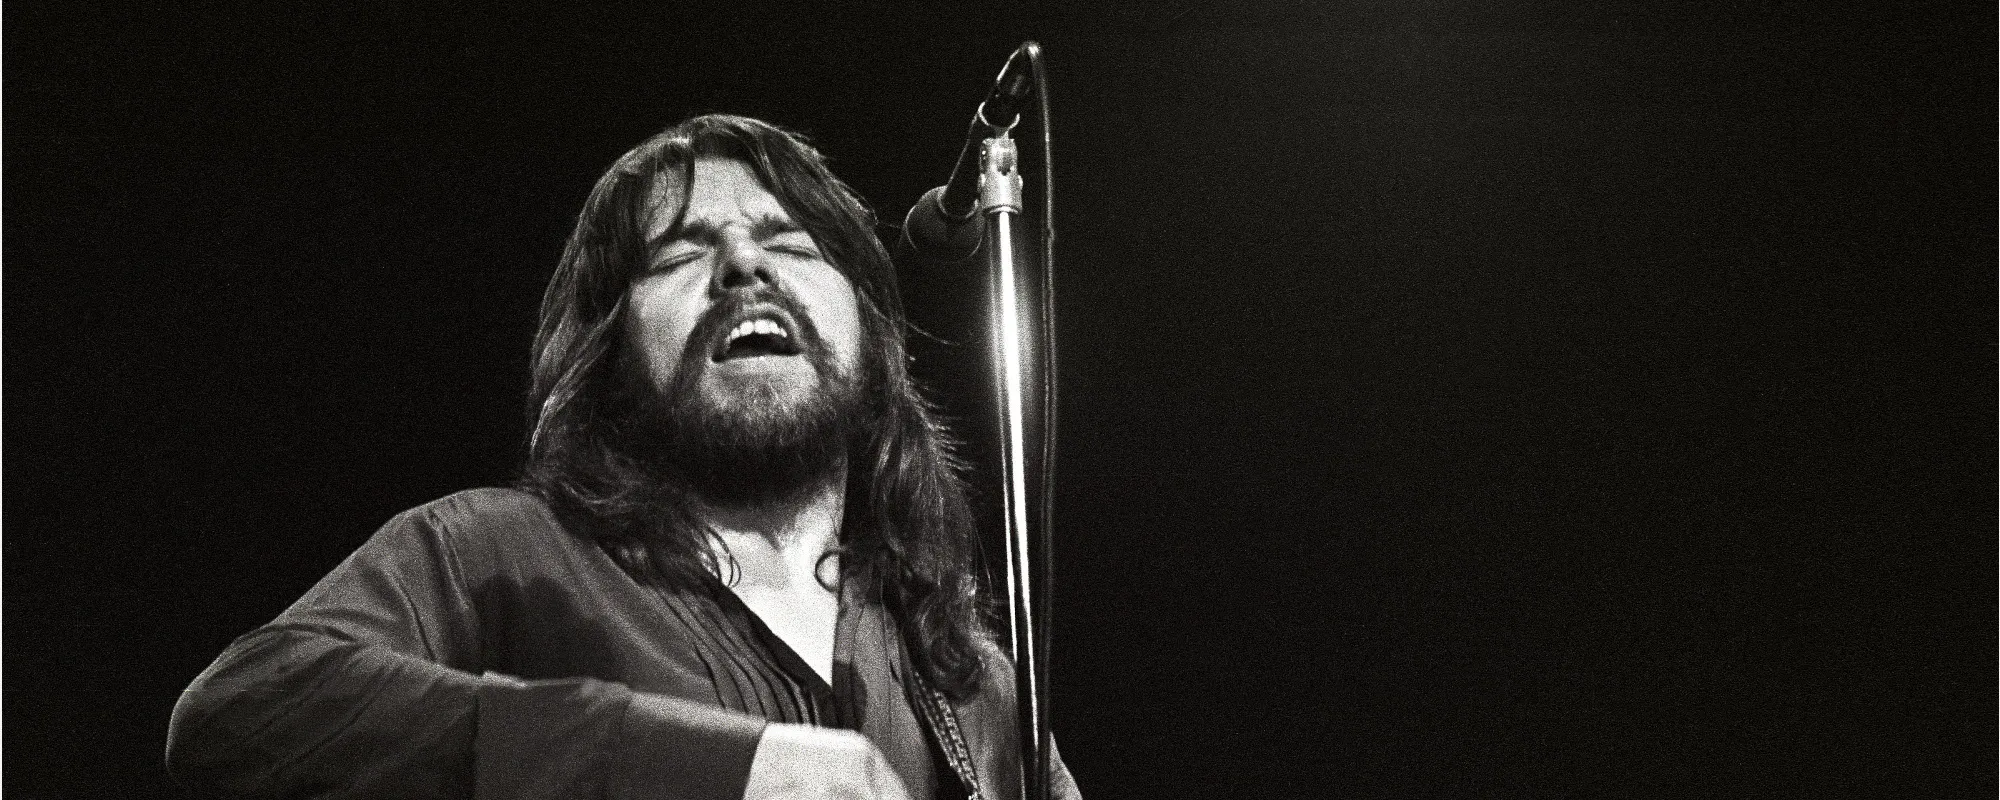 Bob Seger’s “Turn the Page” Performance at Rock & Roll Hall of Fame Induction Revisited